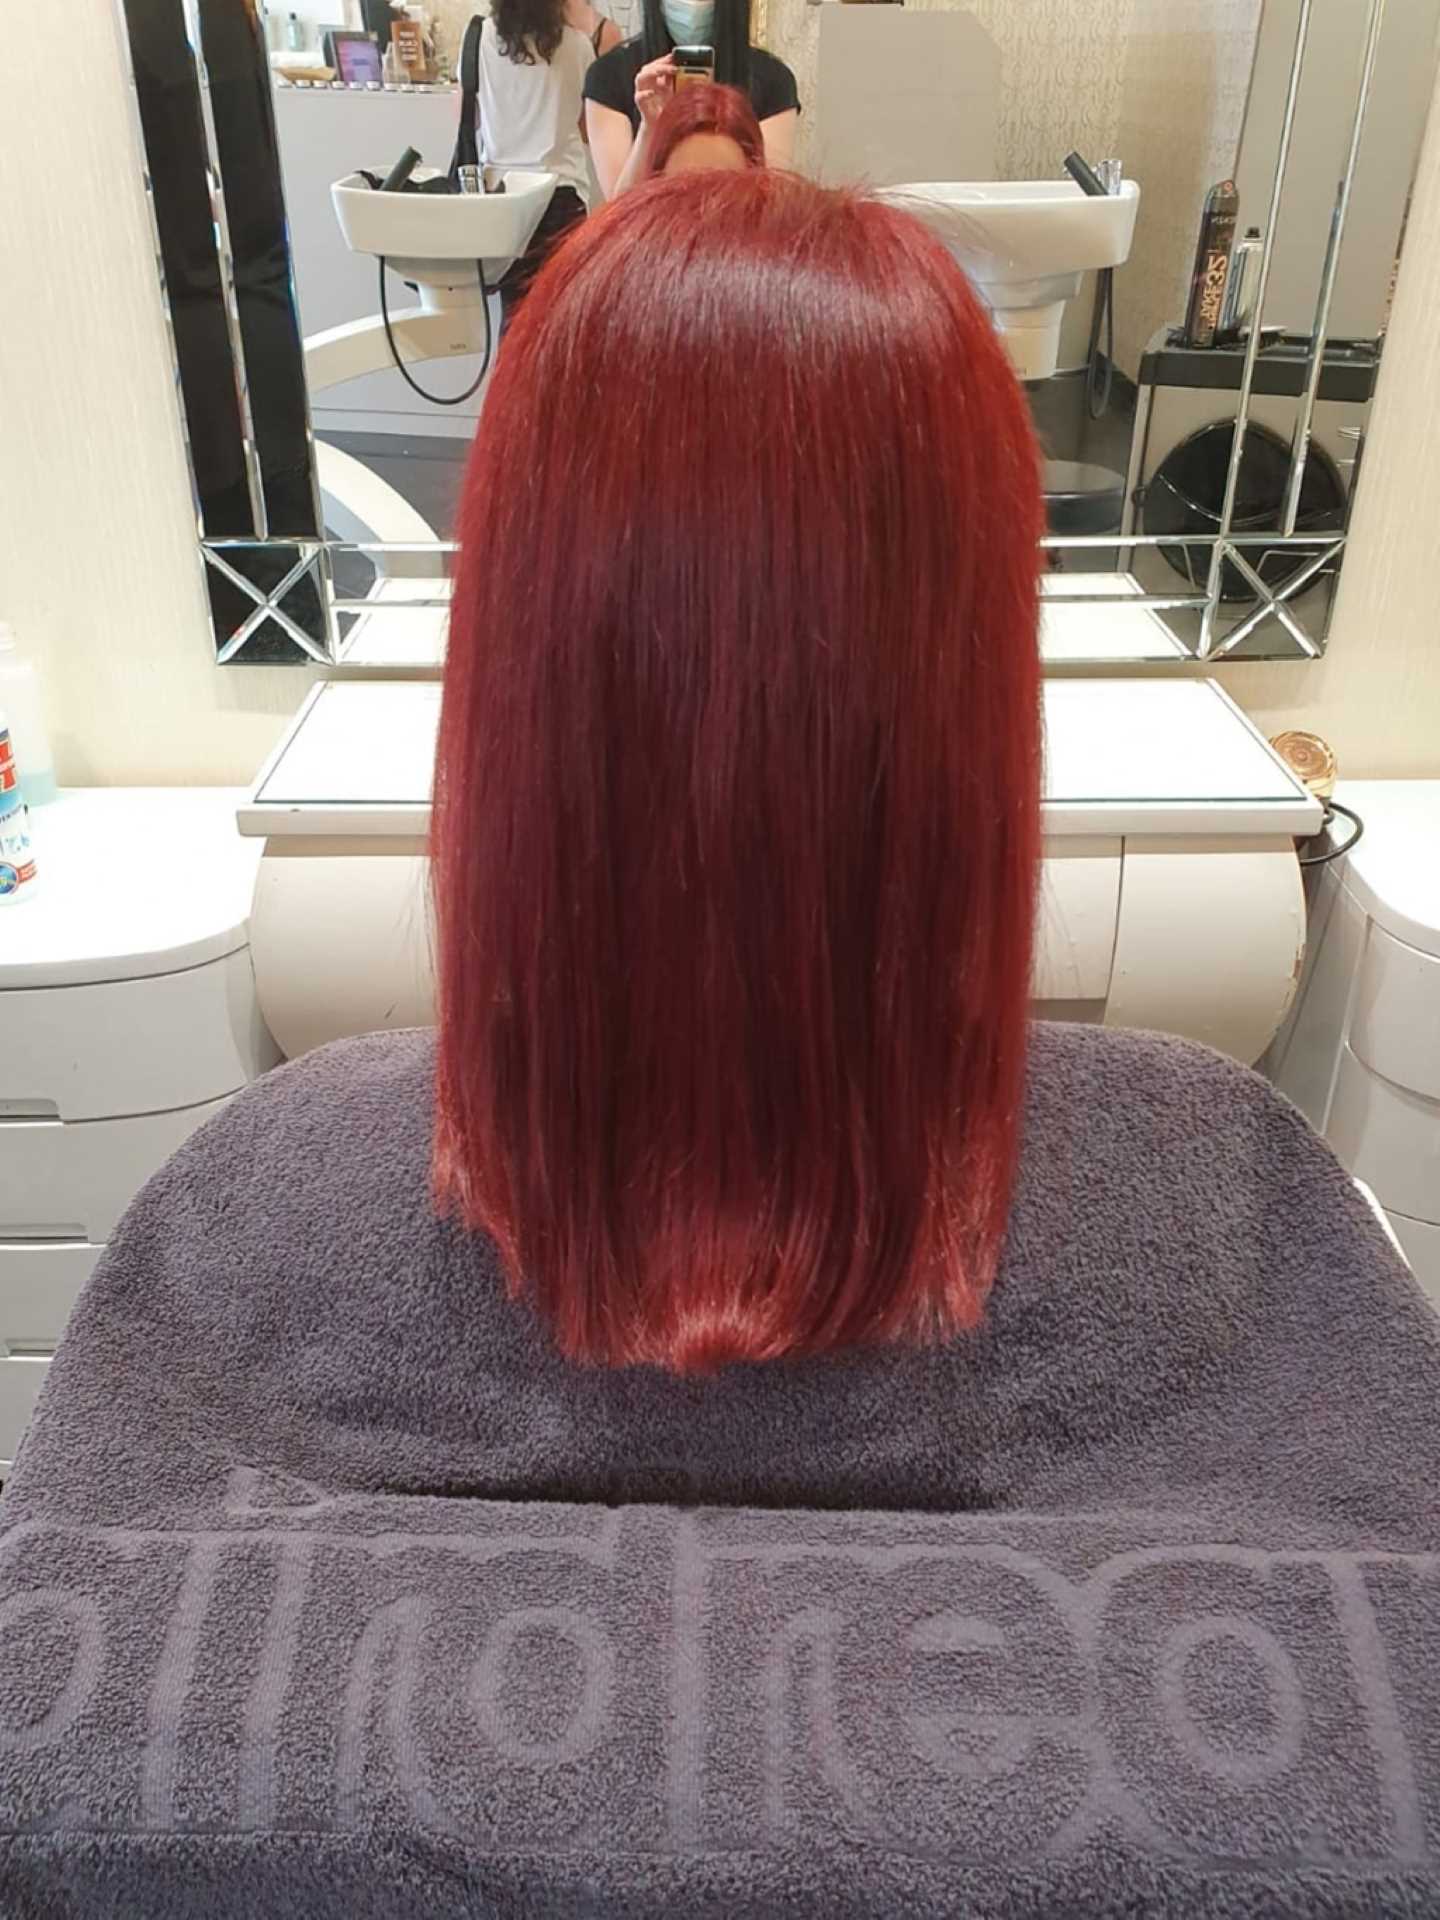 After hair thickening in lengths and tips in a woman with red hair